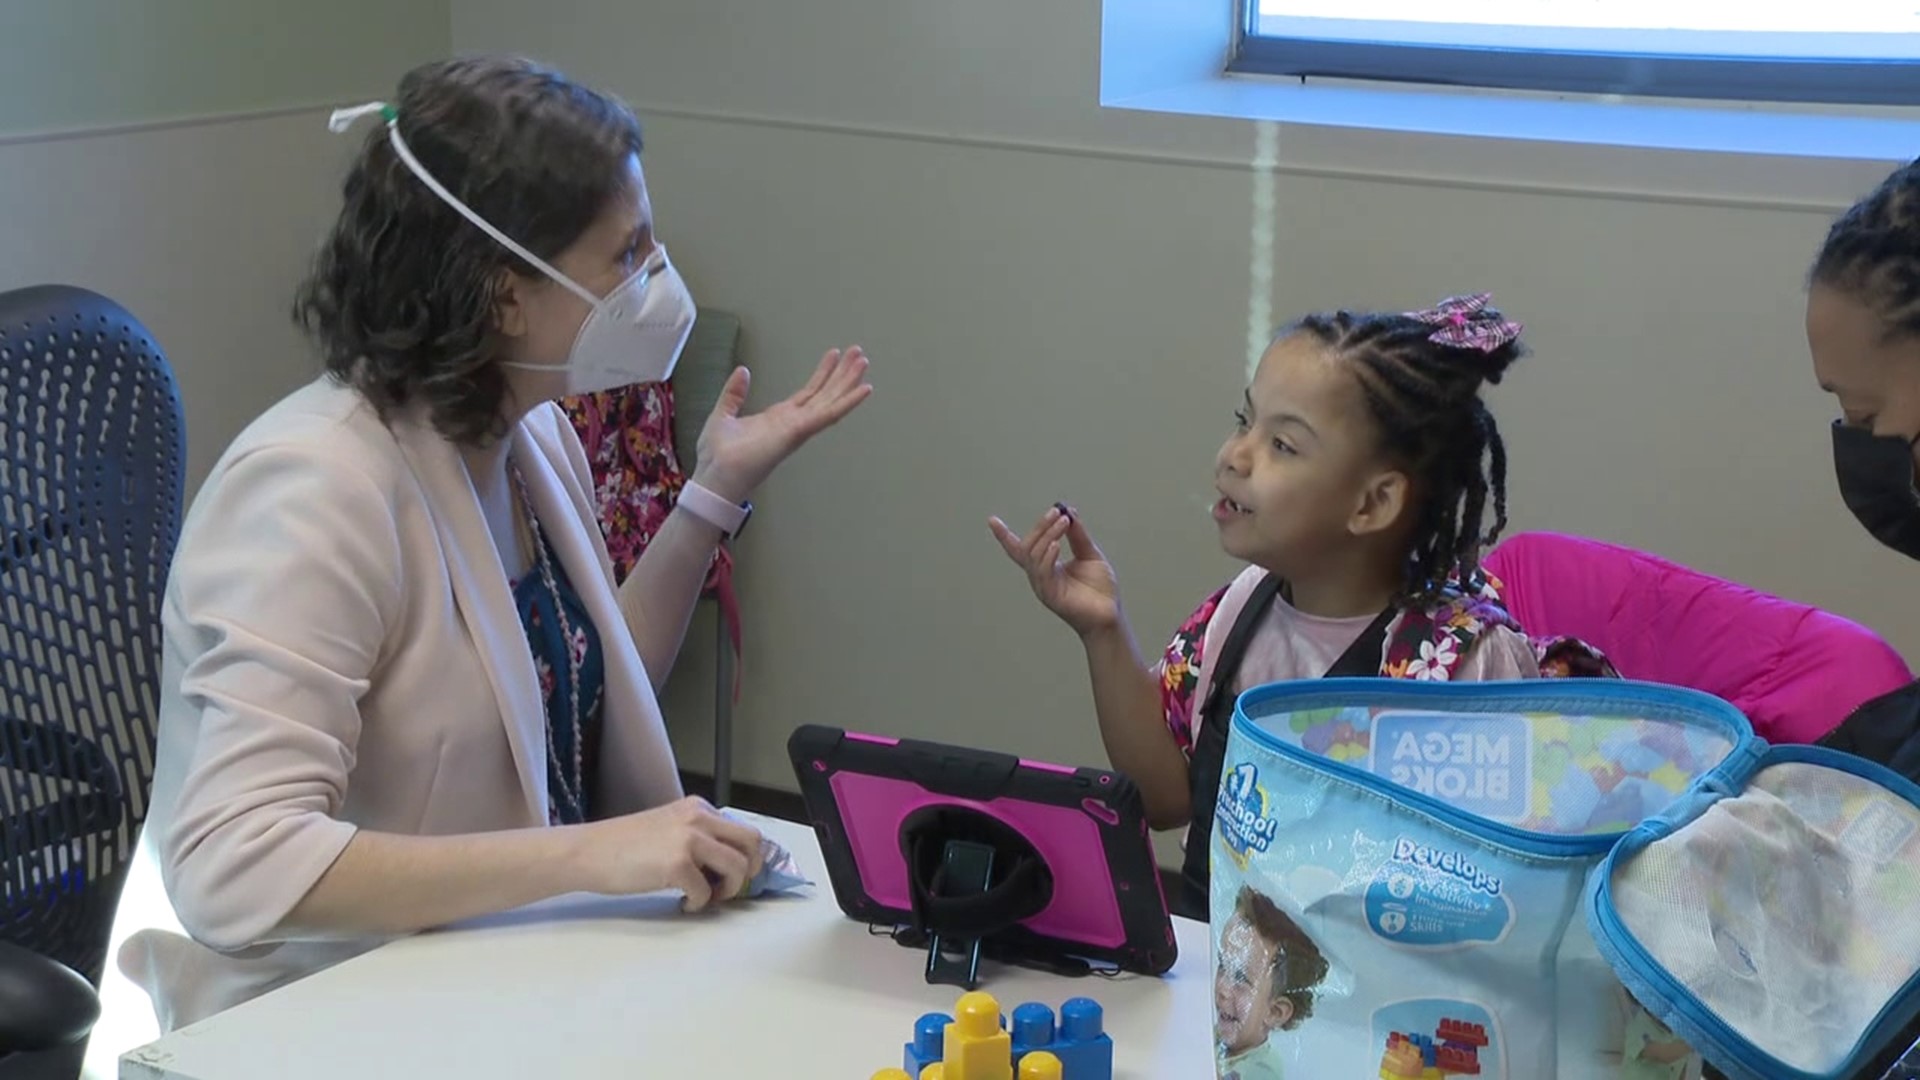 A young girl from Trinidad has been getting treatment at Geisinger for most of her life.  
Geisinger doctors diagnosed the child with Jacobsen Syndrome.